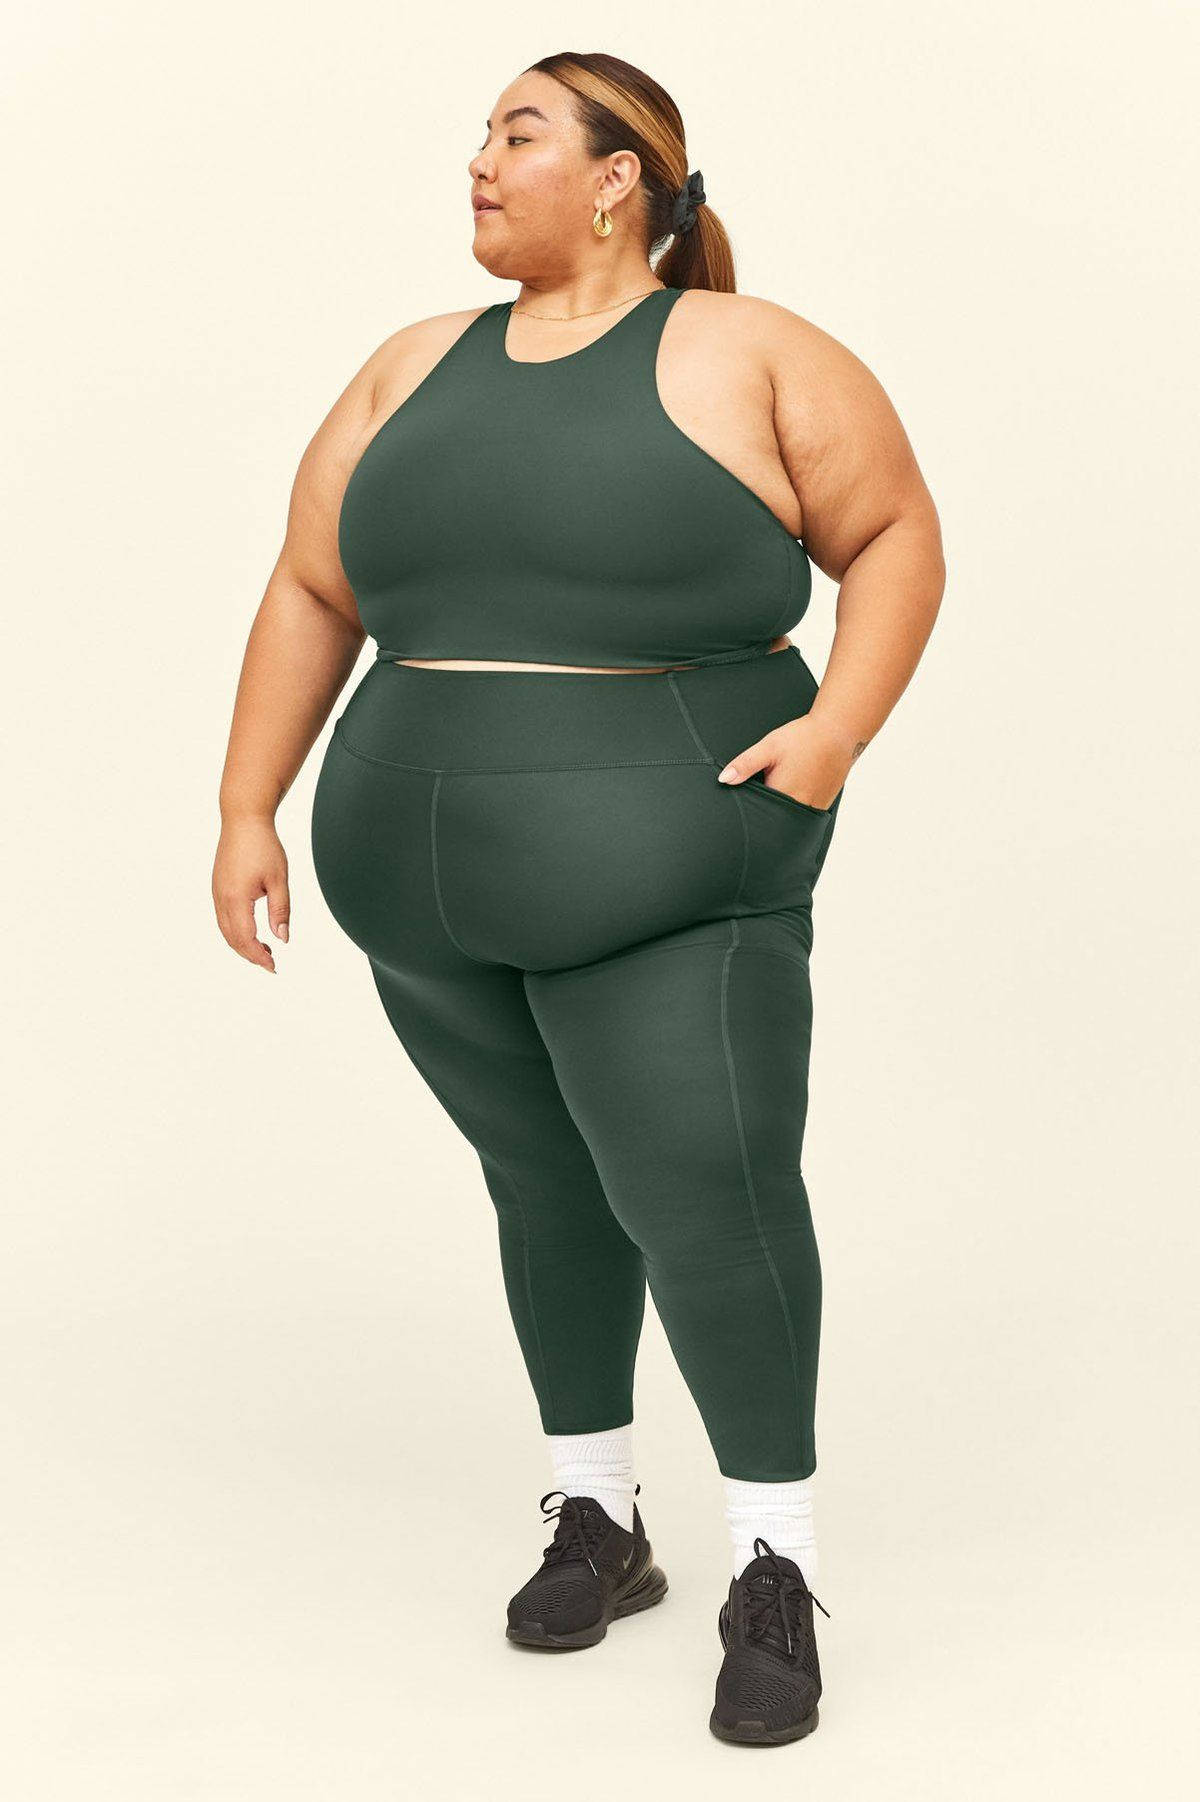 Fat Woman In Green Workout Clothes Wallpaper